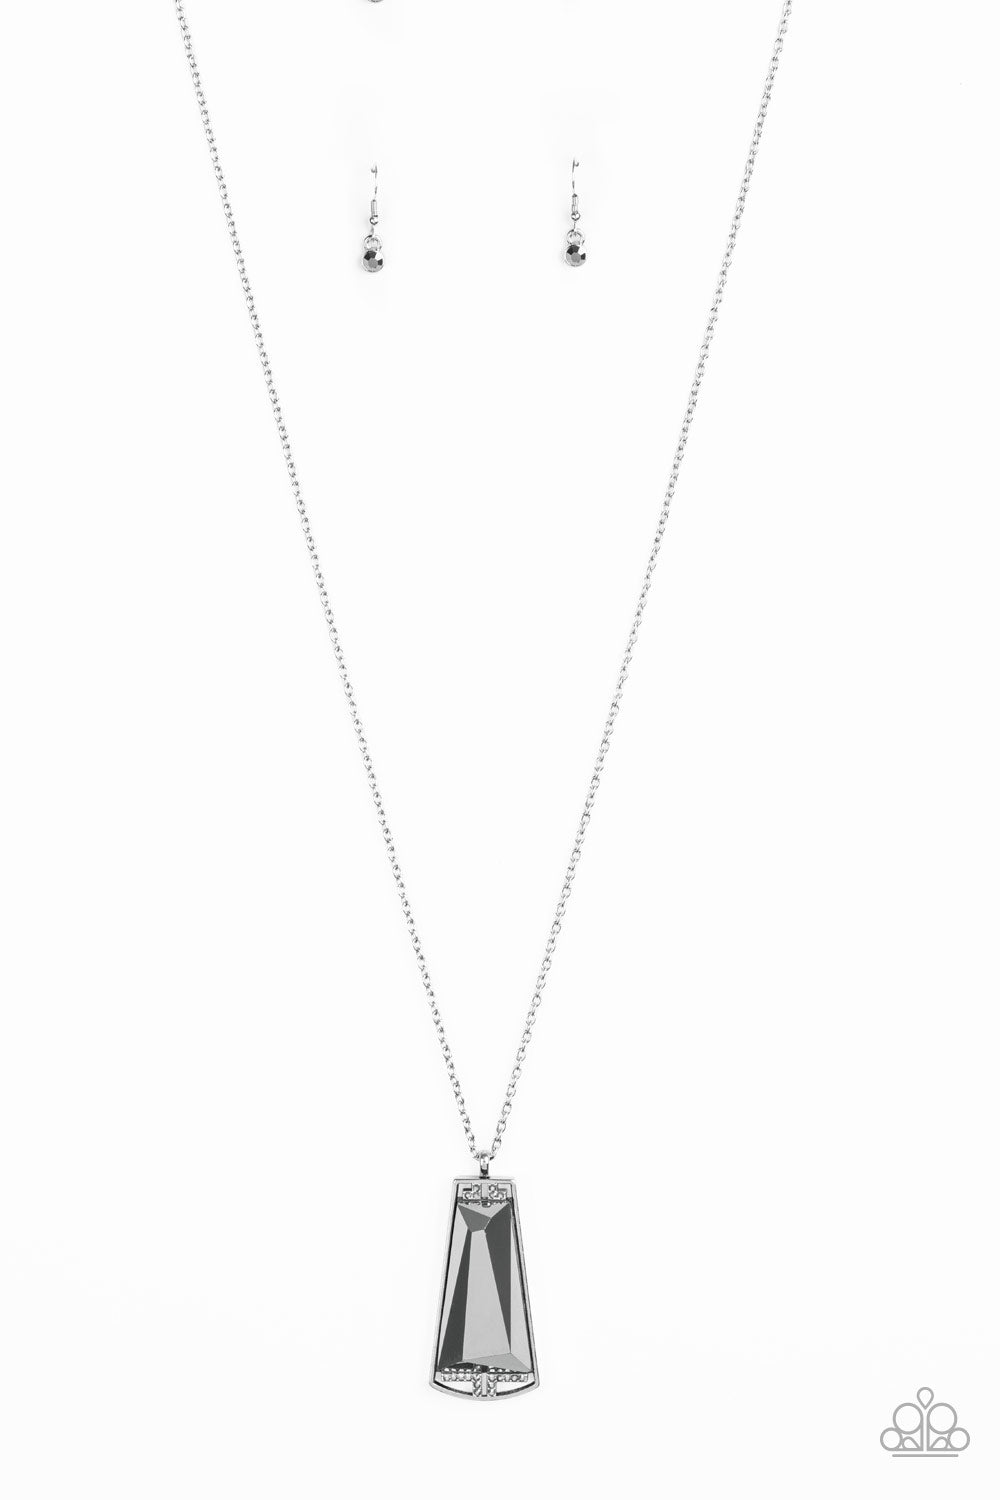 Empire State Elegance - Silver necklace